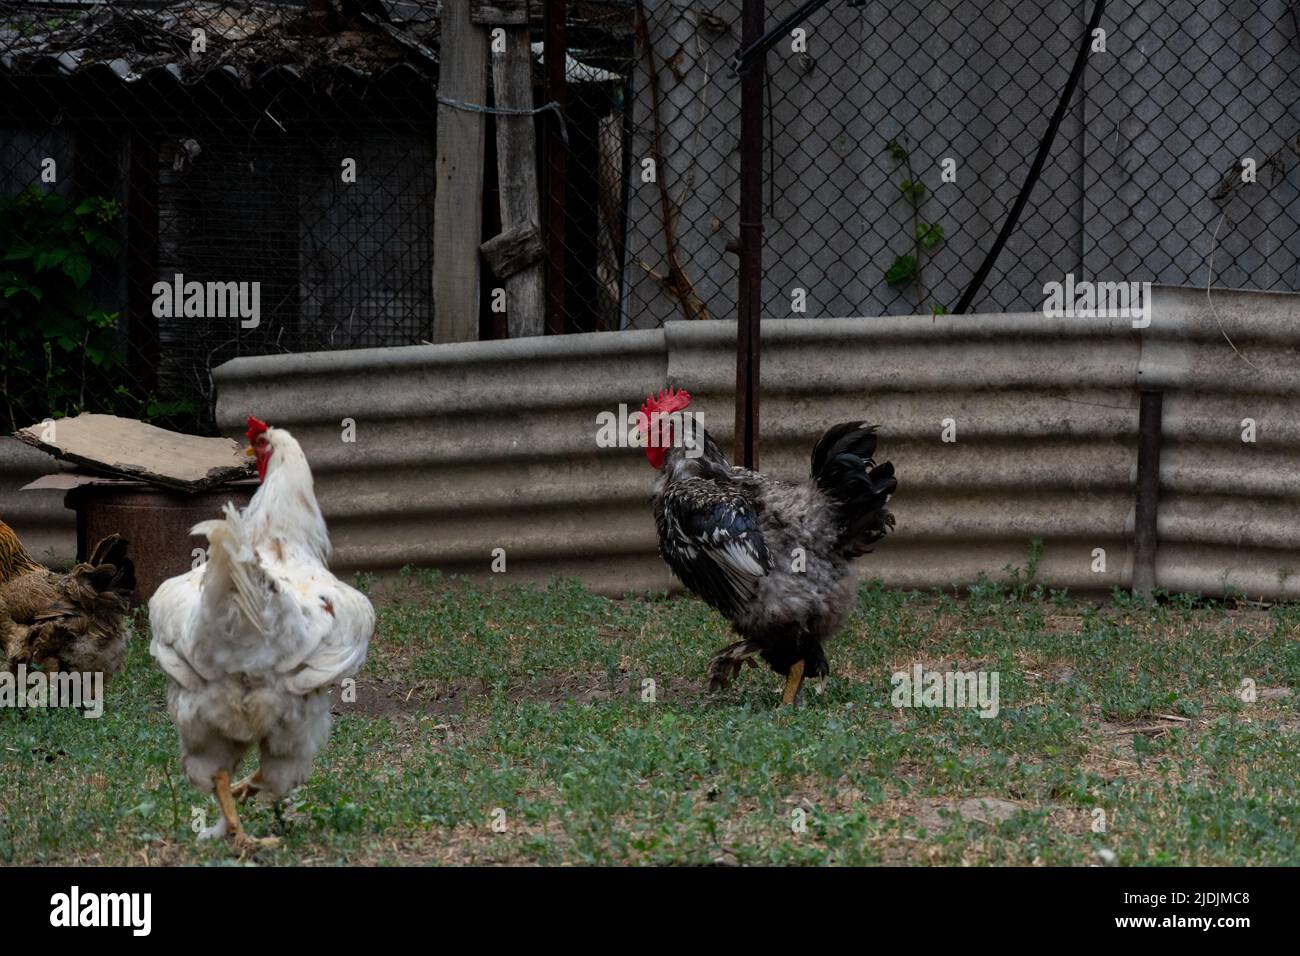 Rooster free range in the backyard Stock Photo